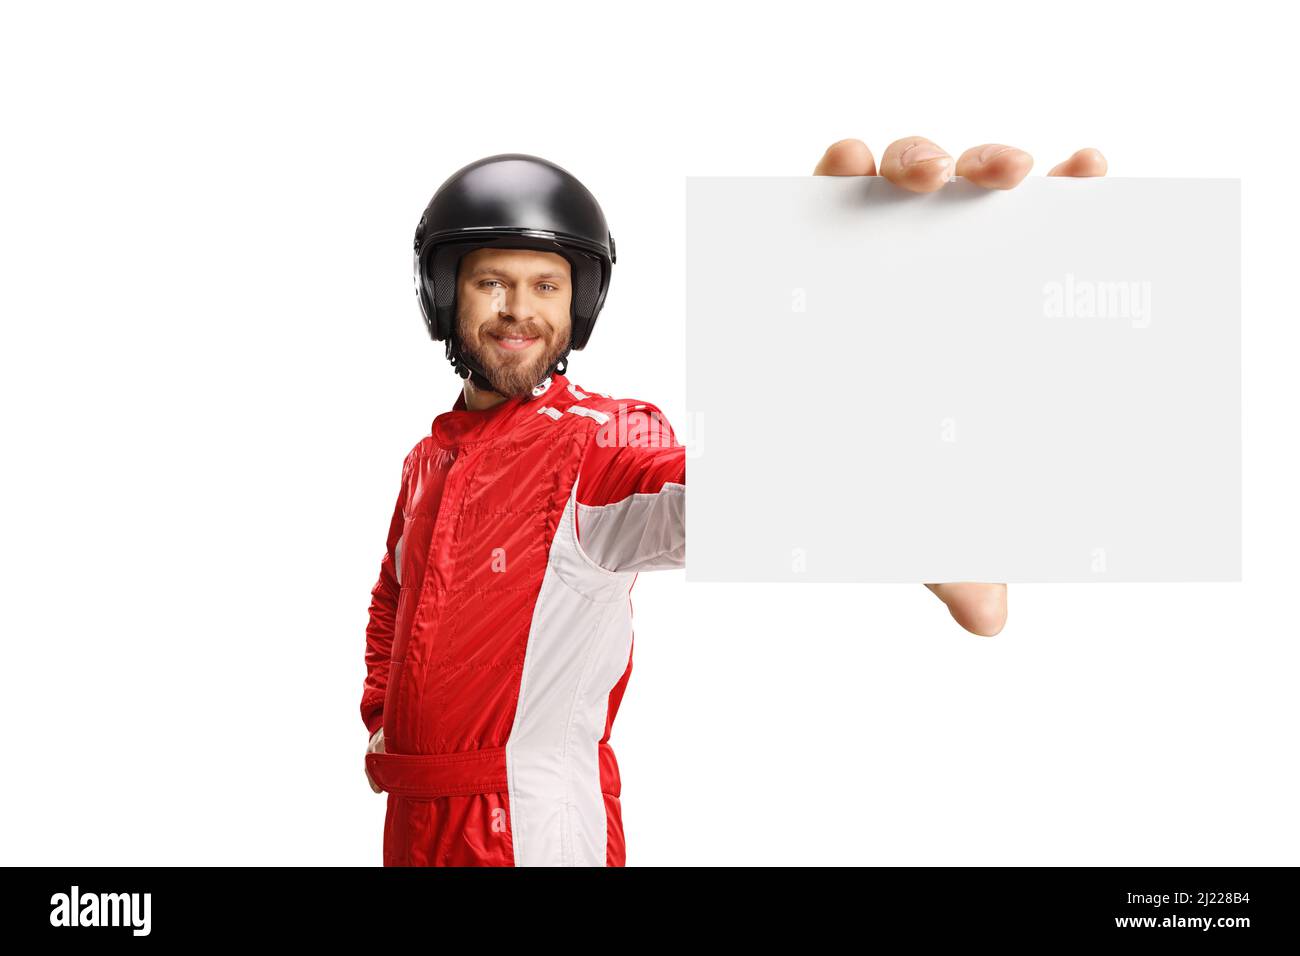 Racer holding a blank card in front of camera isolated on white background Stock Photo